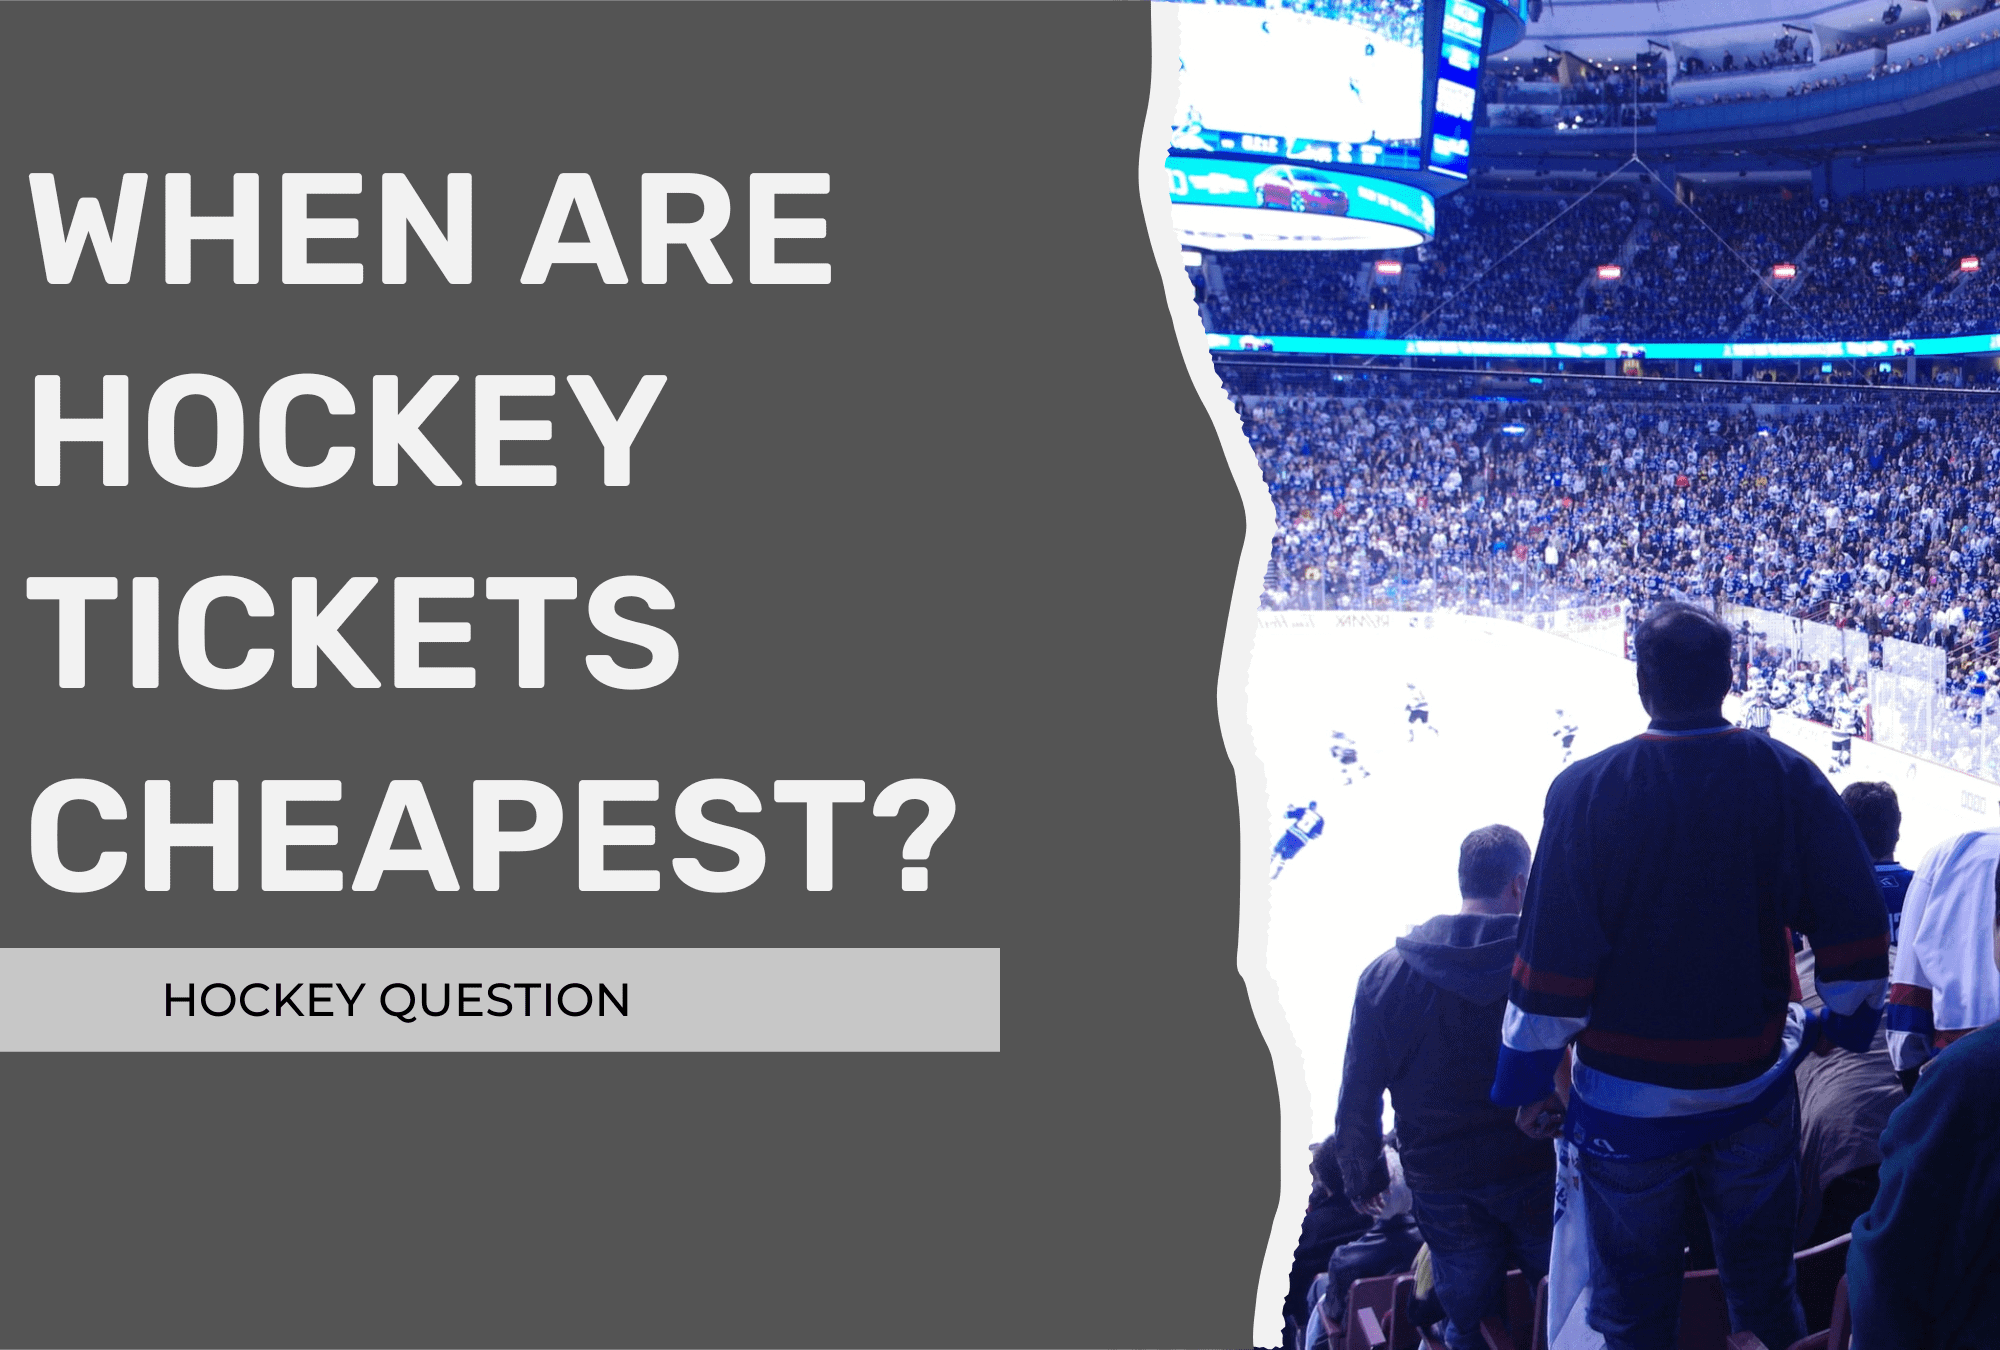 When Are Hockey Tickets Cheapest? (Plus How to Get the Best Deal